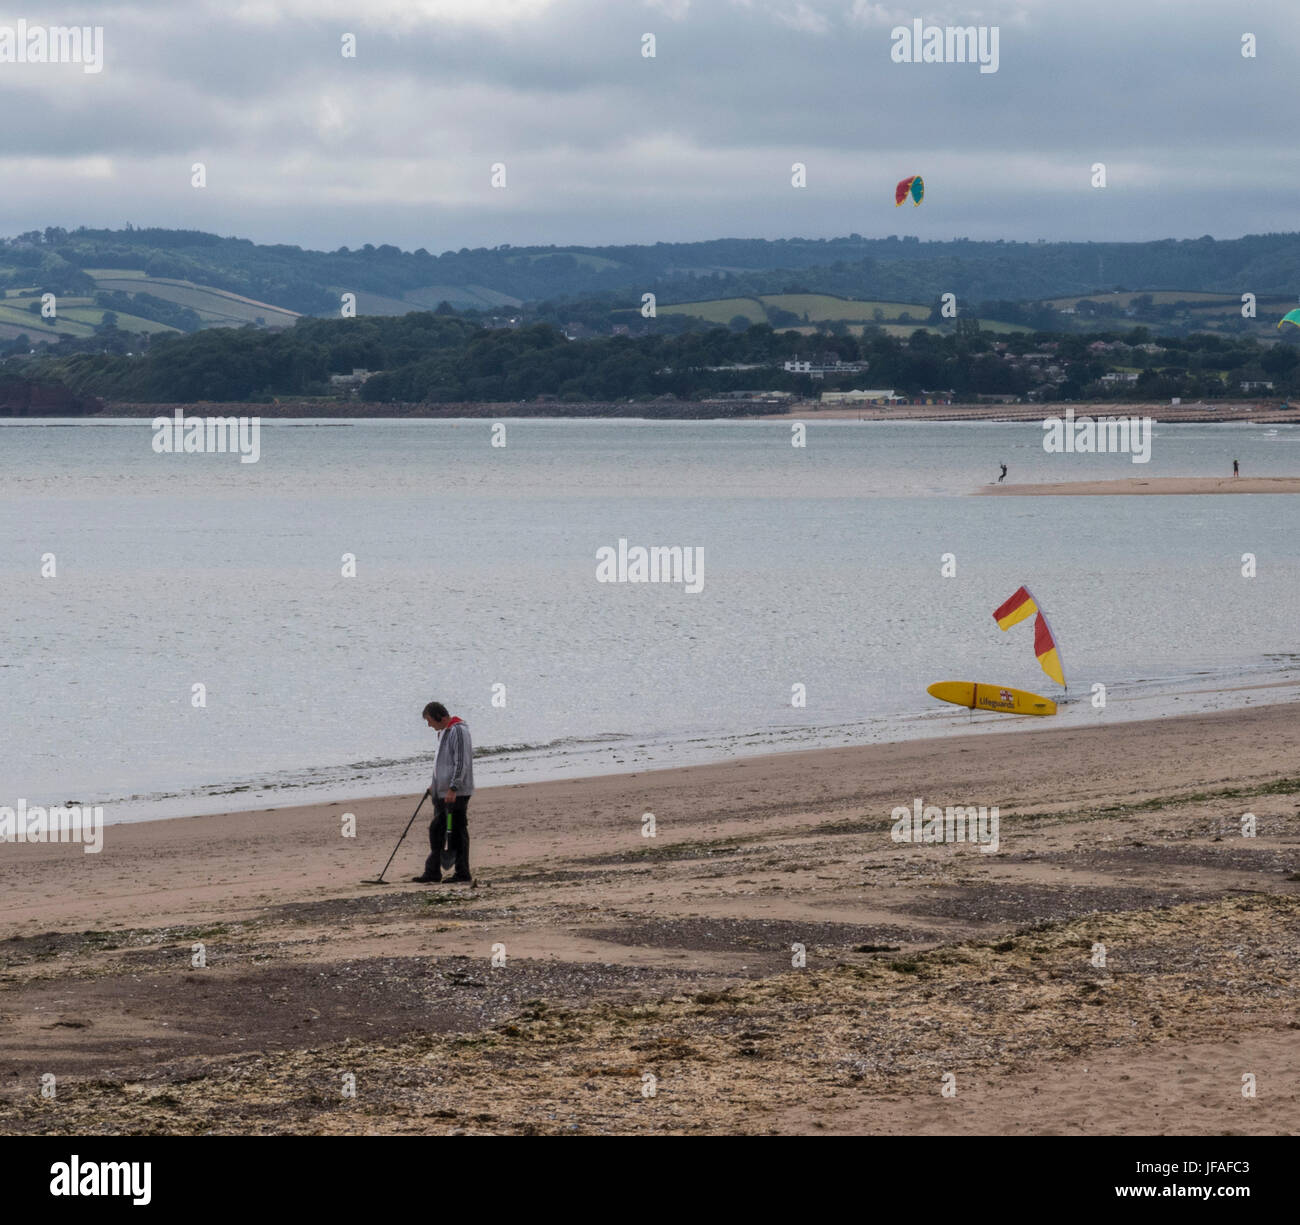 Exmouth, Devon, UK. 30th June 2017. A man searches for treasure with a metal detector on the beach at Exmouth on a cloudy overcast day. Credit: Photo Central/Alamy Live News Stock Photo